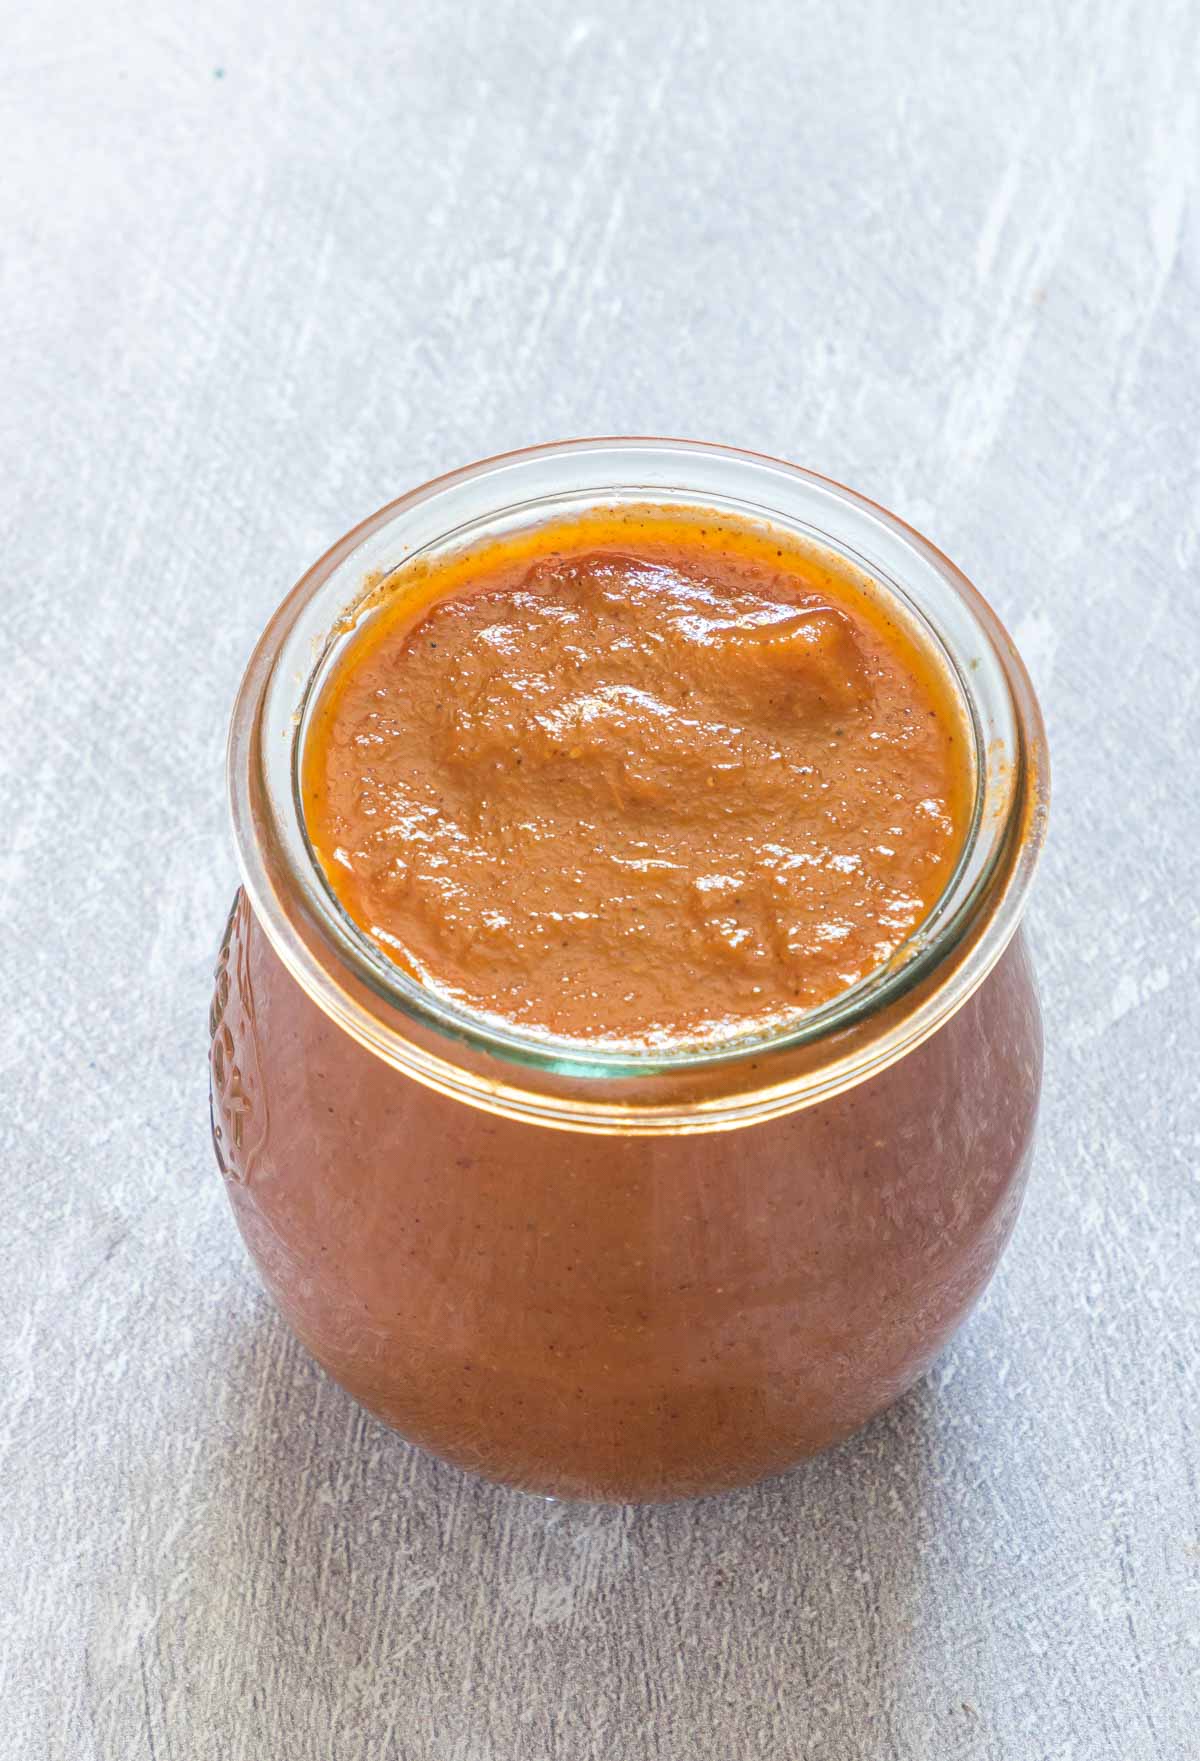 homemade ketchup - homemade tomato ketchup in a glass jar on a table